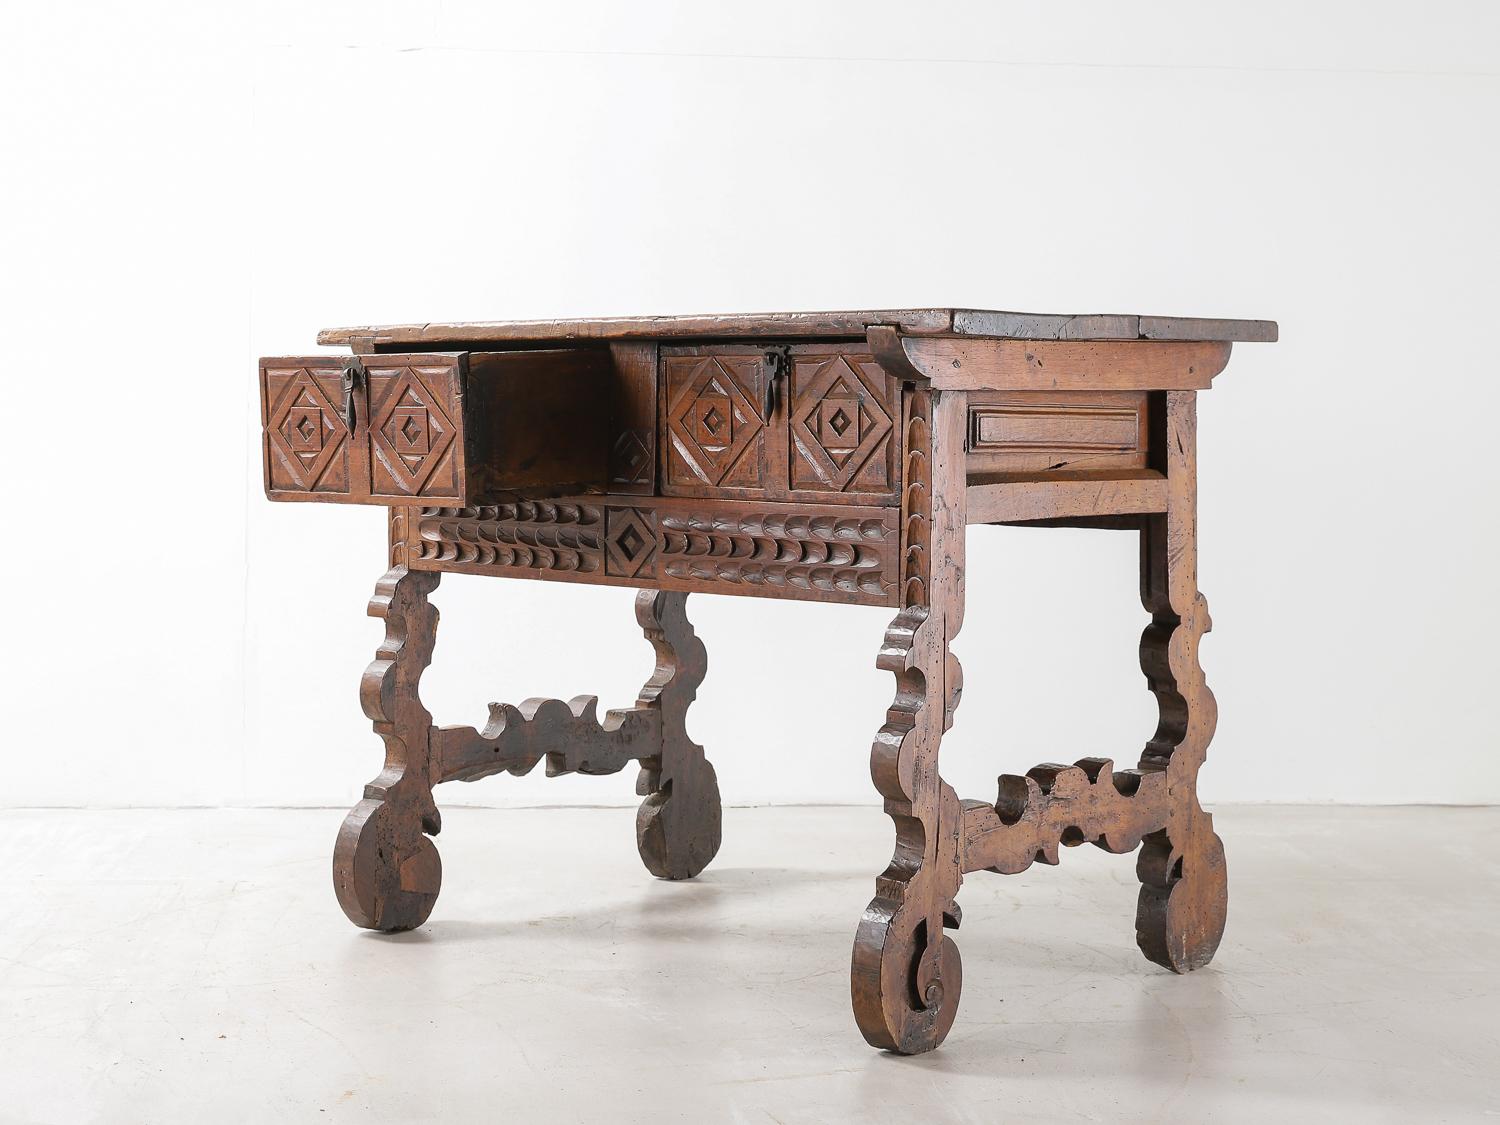 A Spanish 18th century walnut table with decorative original carved frieze with double drawers, original iron pulls and beautiful lyre legs.